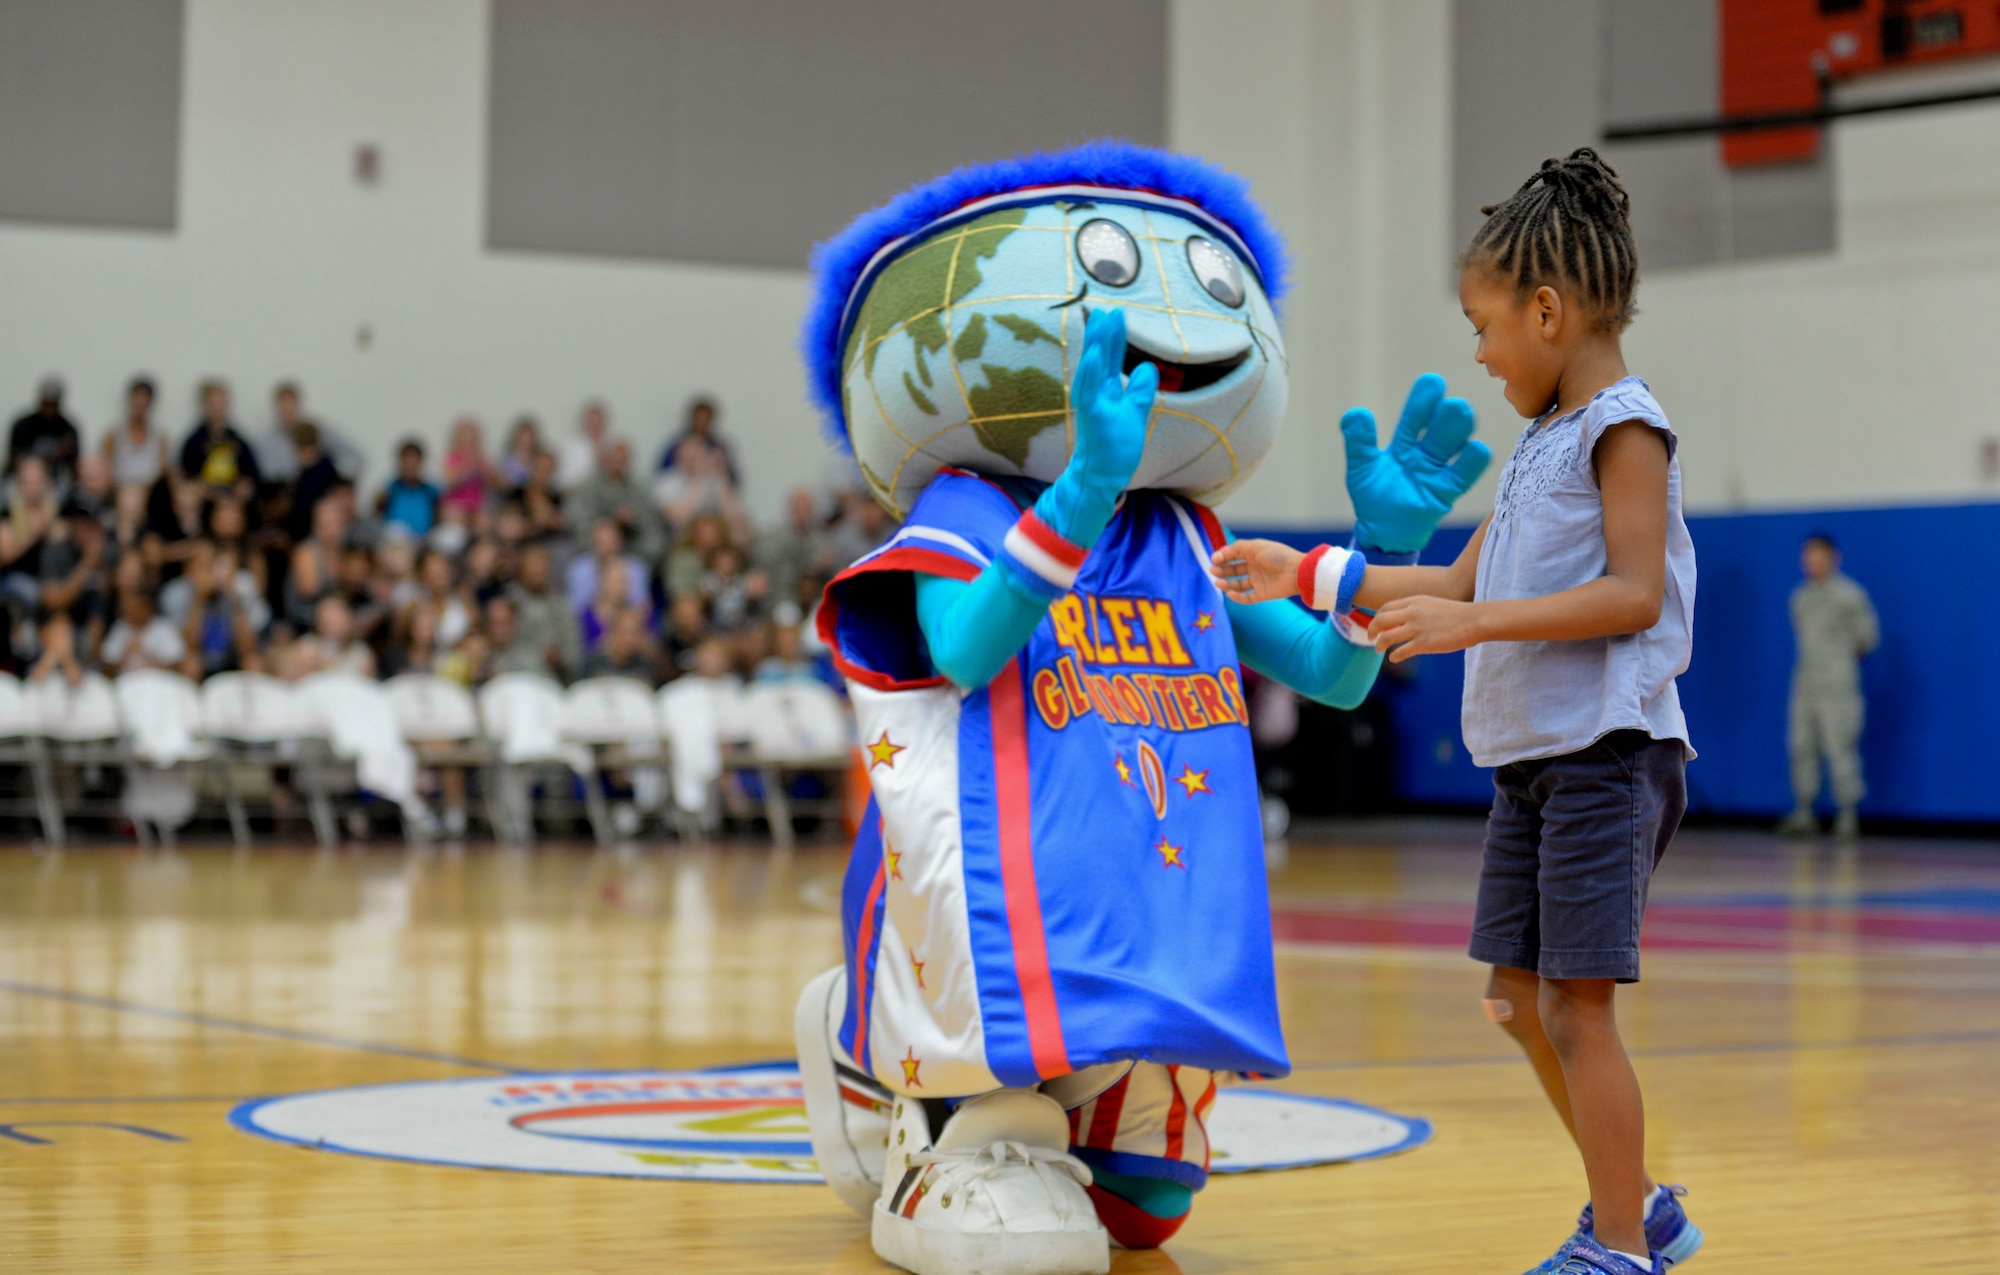 Globie, the Harlem Globetrotter mascot, gives a wristband to a Team Andersen member after winning a game of musical chairs, Dec. 1, 2014, at Andersen Air Force Base, Guam. The Globetrotters captivated Team Andersen with their athleticism, theater and comedy as well as its audience participation, choreography, tricks and their overall basketball skill. (U.S. Air Force photo by Staff Sgt. Robert Hicks/Released)  